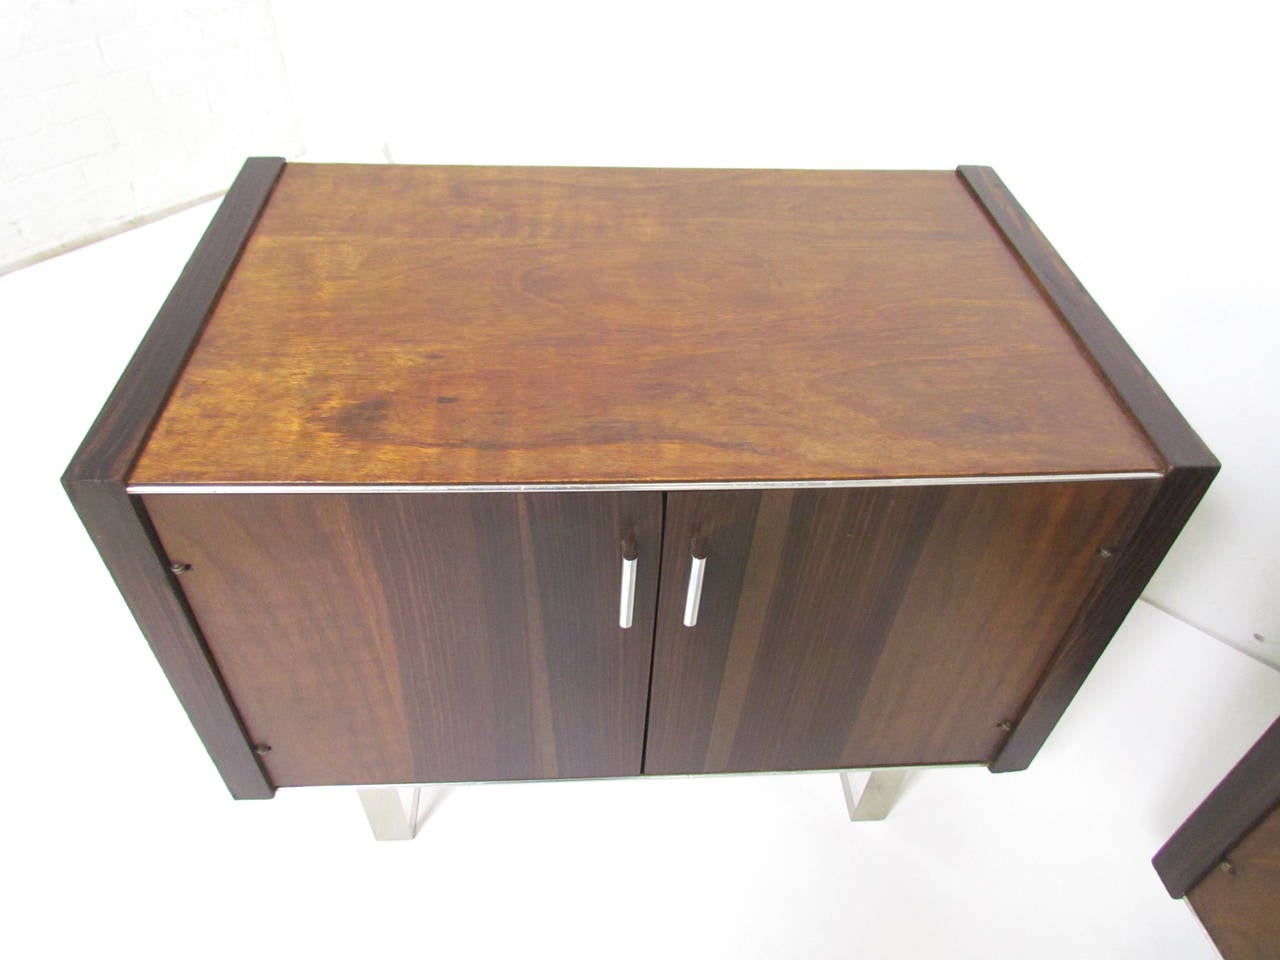 Pair of Mid-Century Modern Nightstands in Rosewood, Chrome and Lucite 1